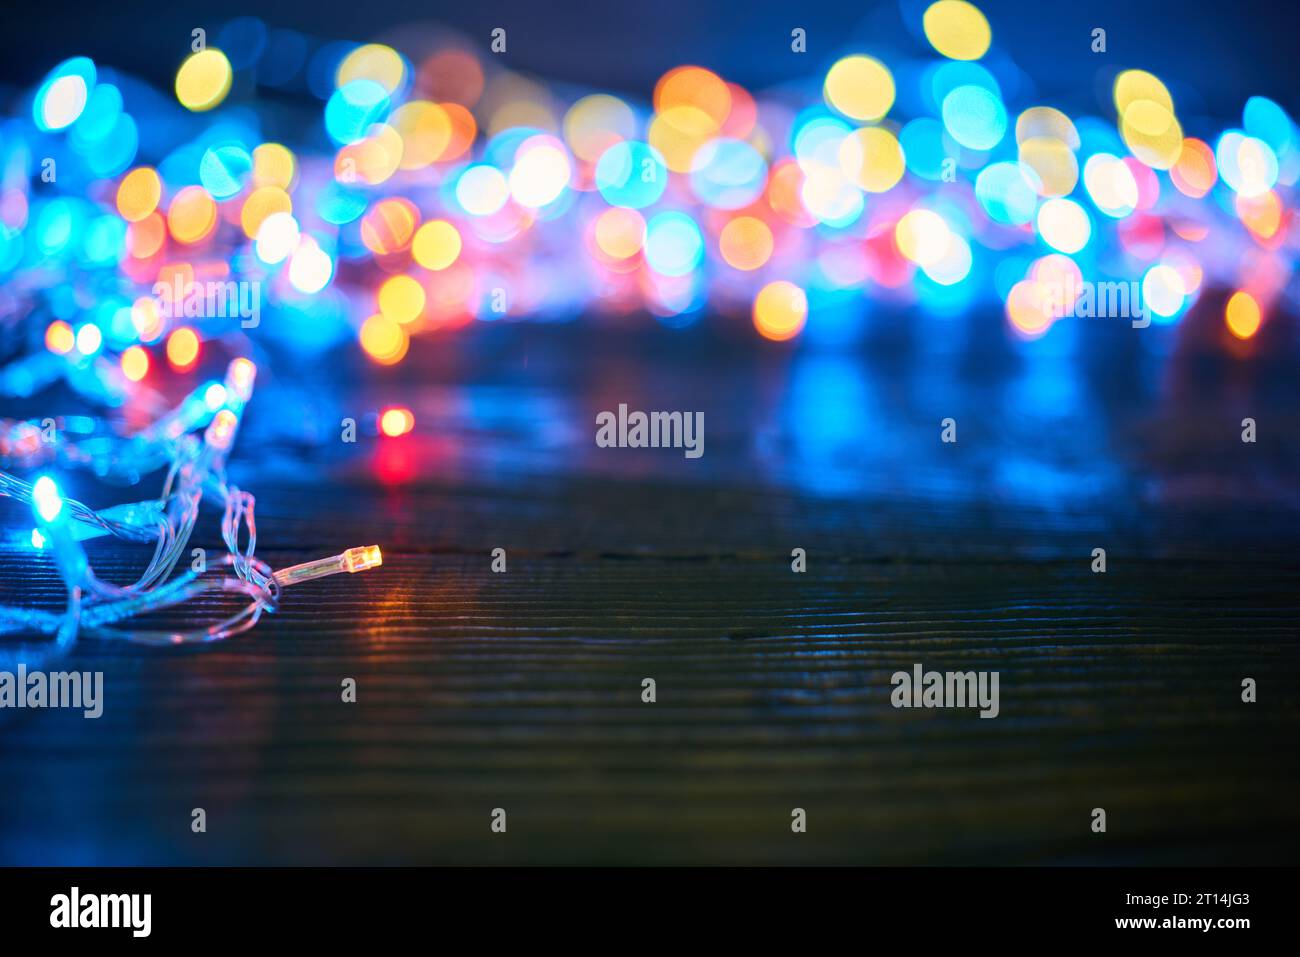 Colorful christmas lights background with copy space. Merry Christmas and Happy New Year festive composition Stock Photo